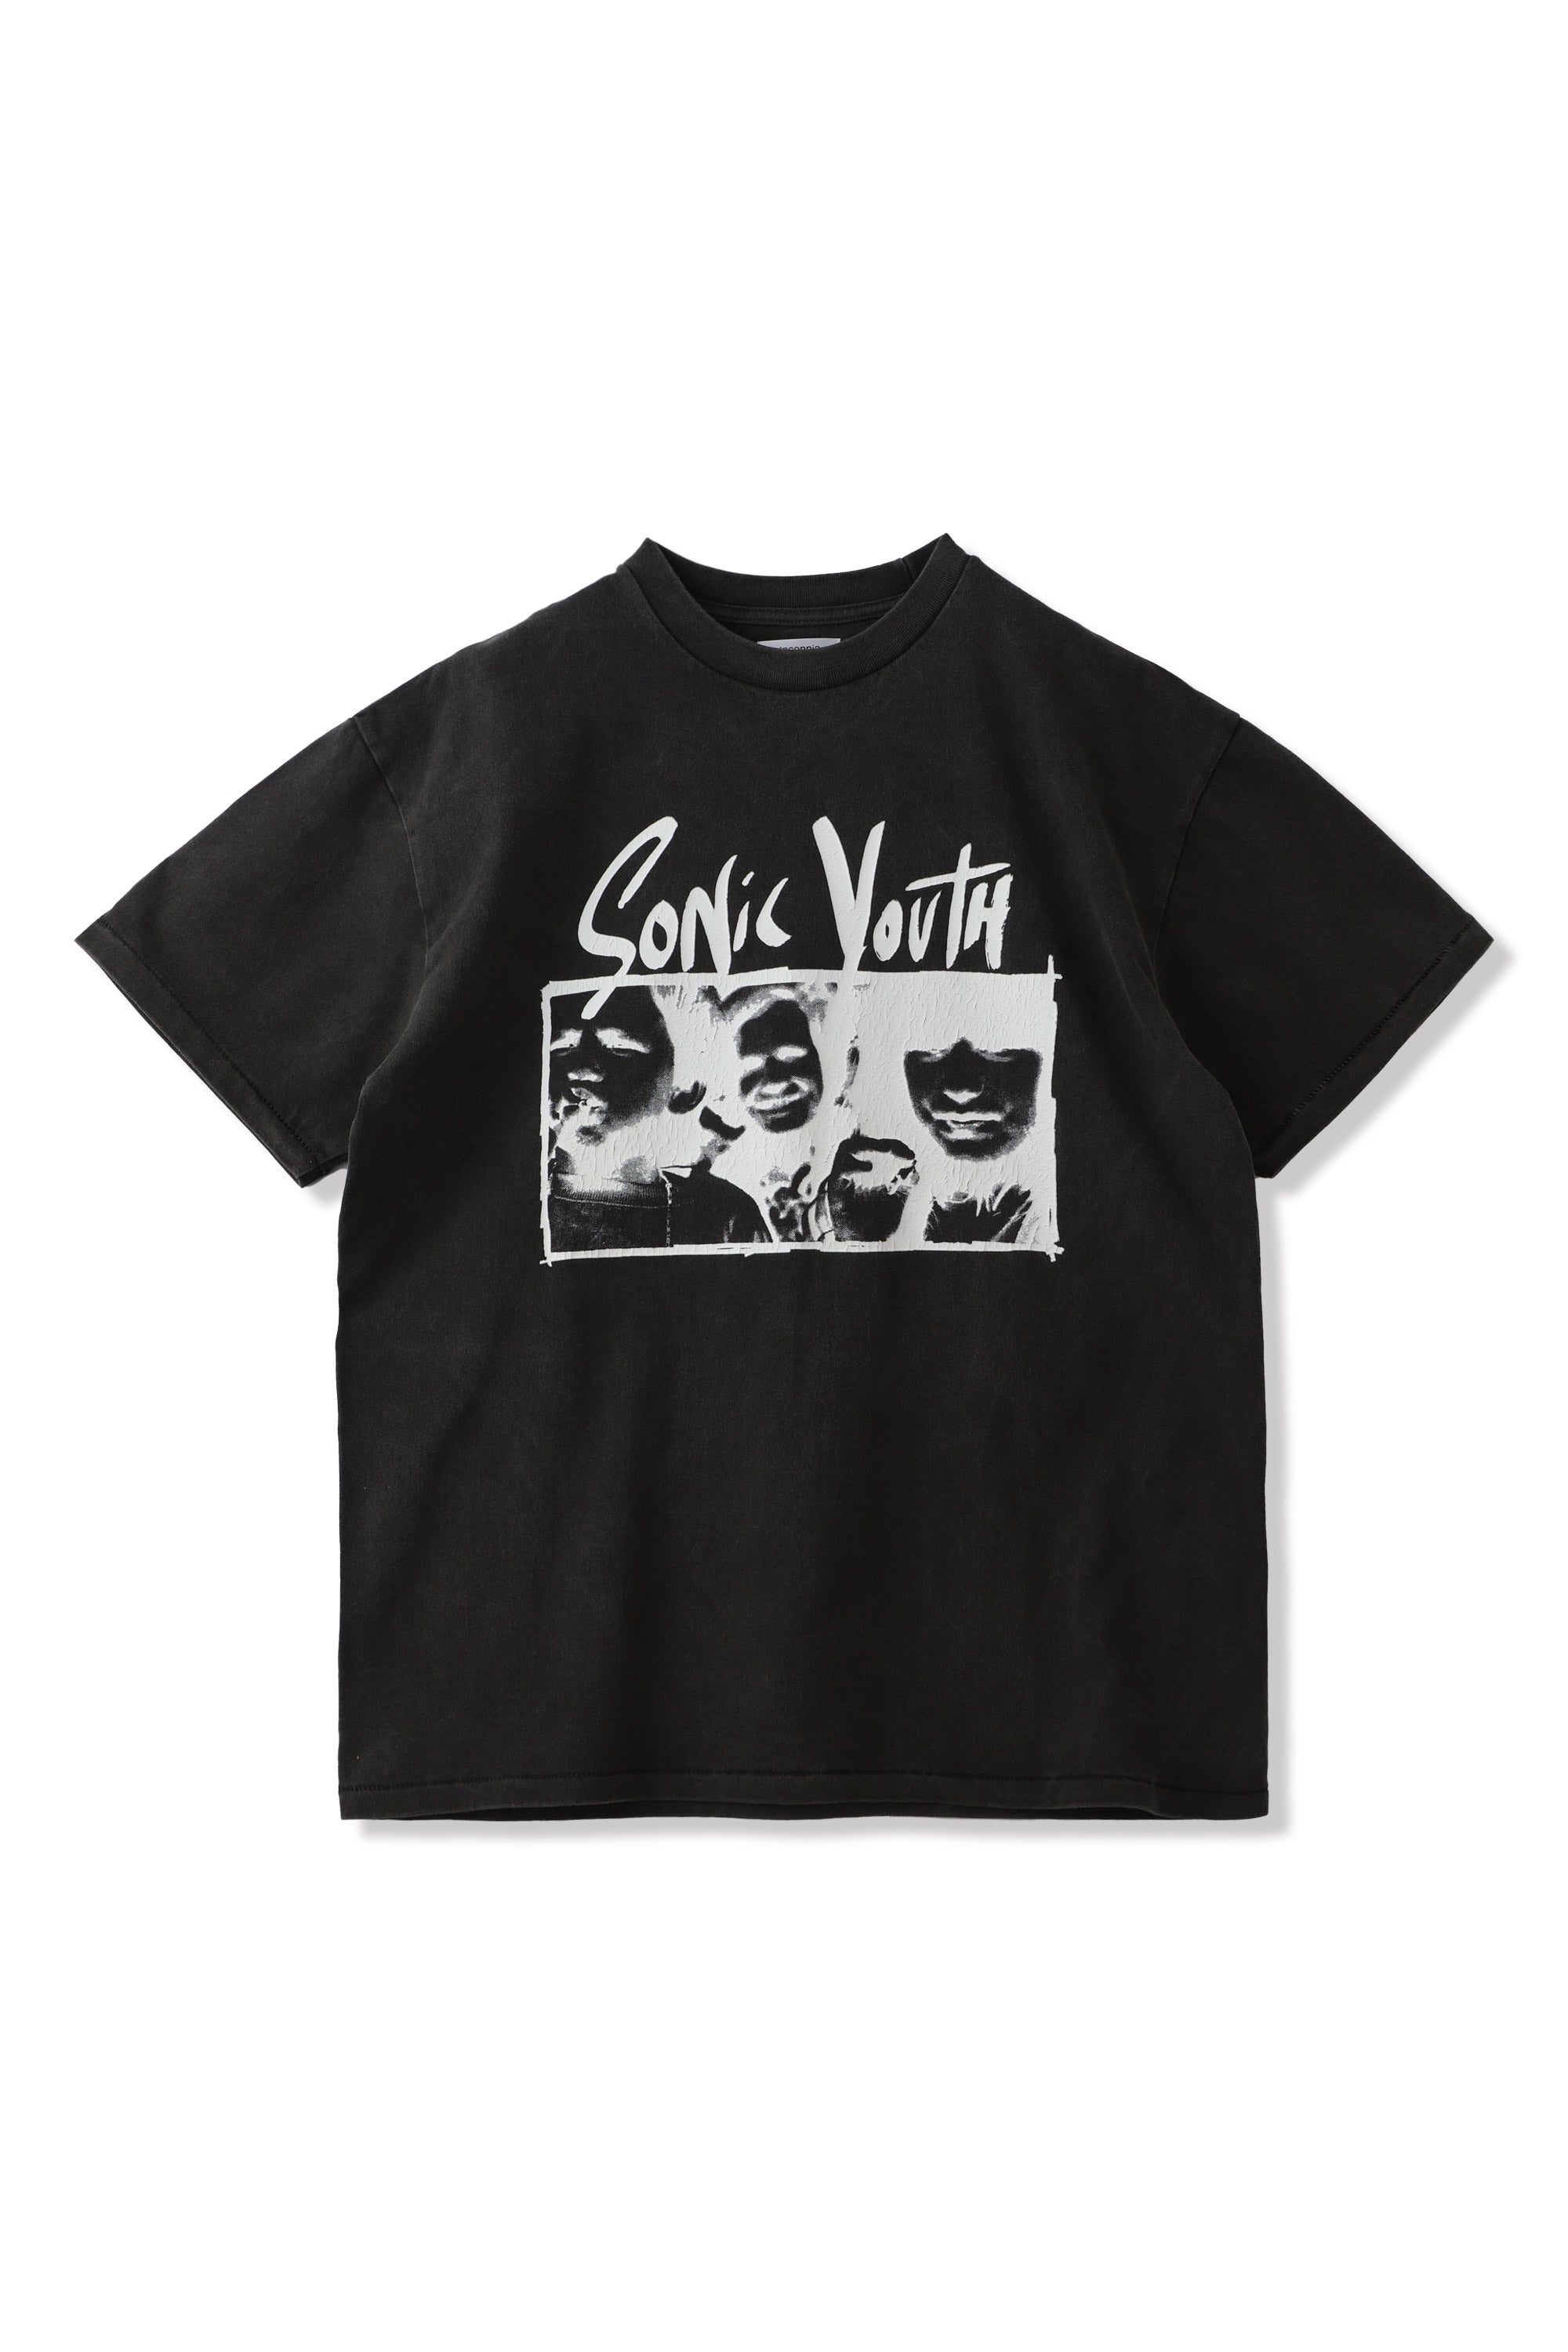 ×SONIC YOUTH SELF OBSESSED AND SEXXEE TEE BLACK